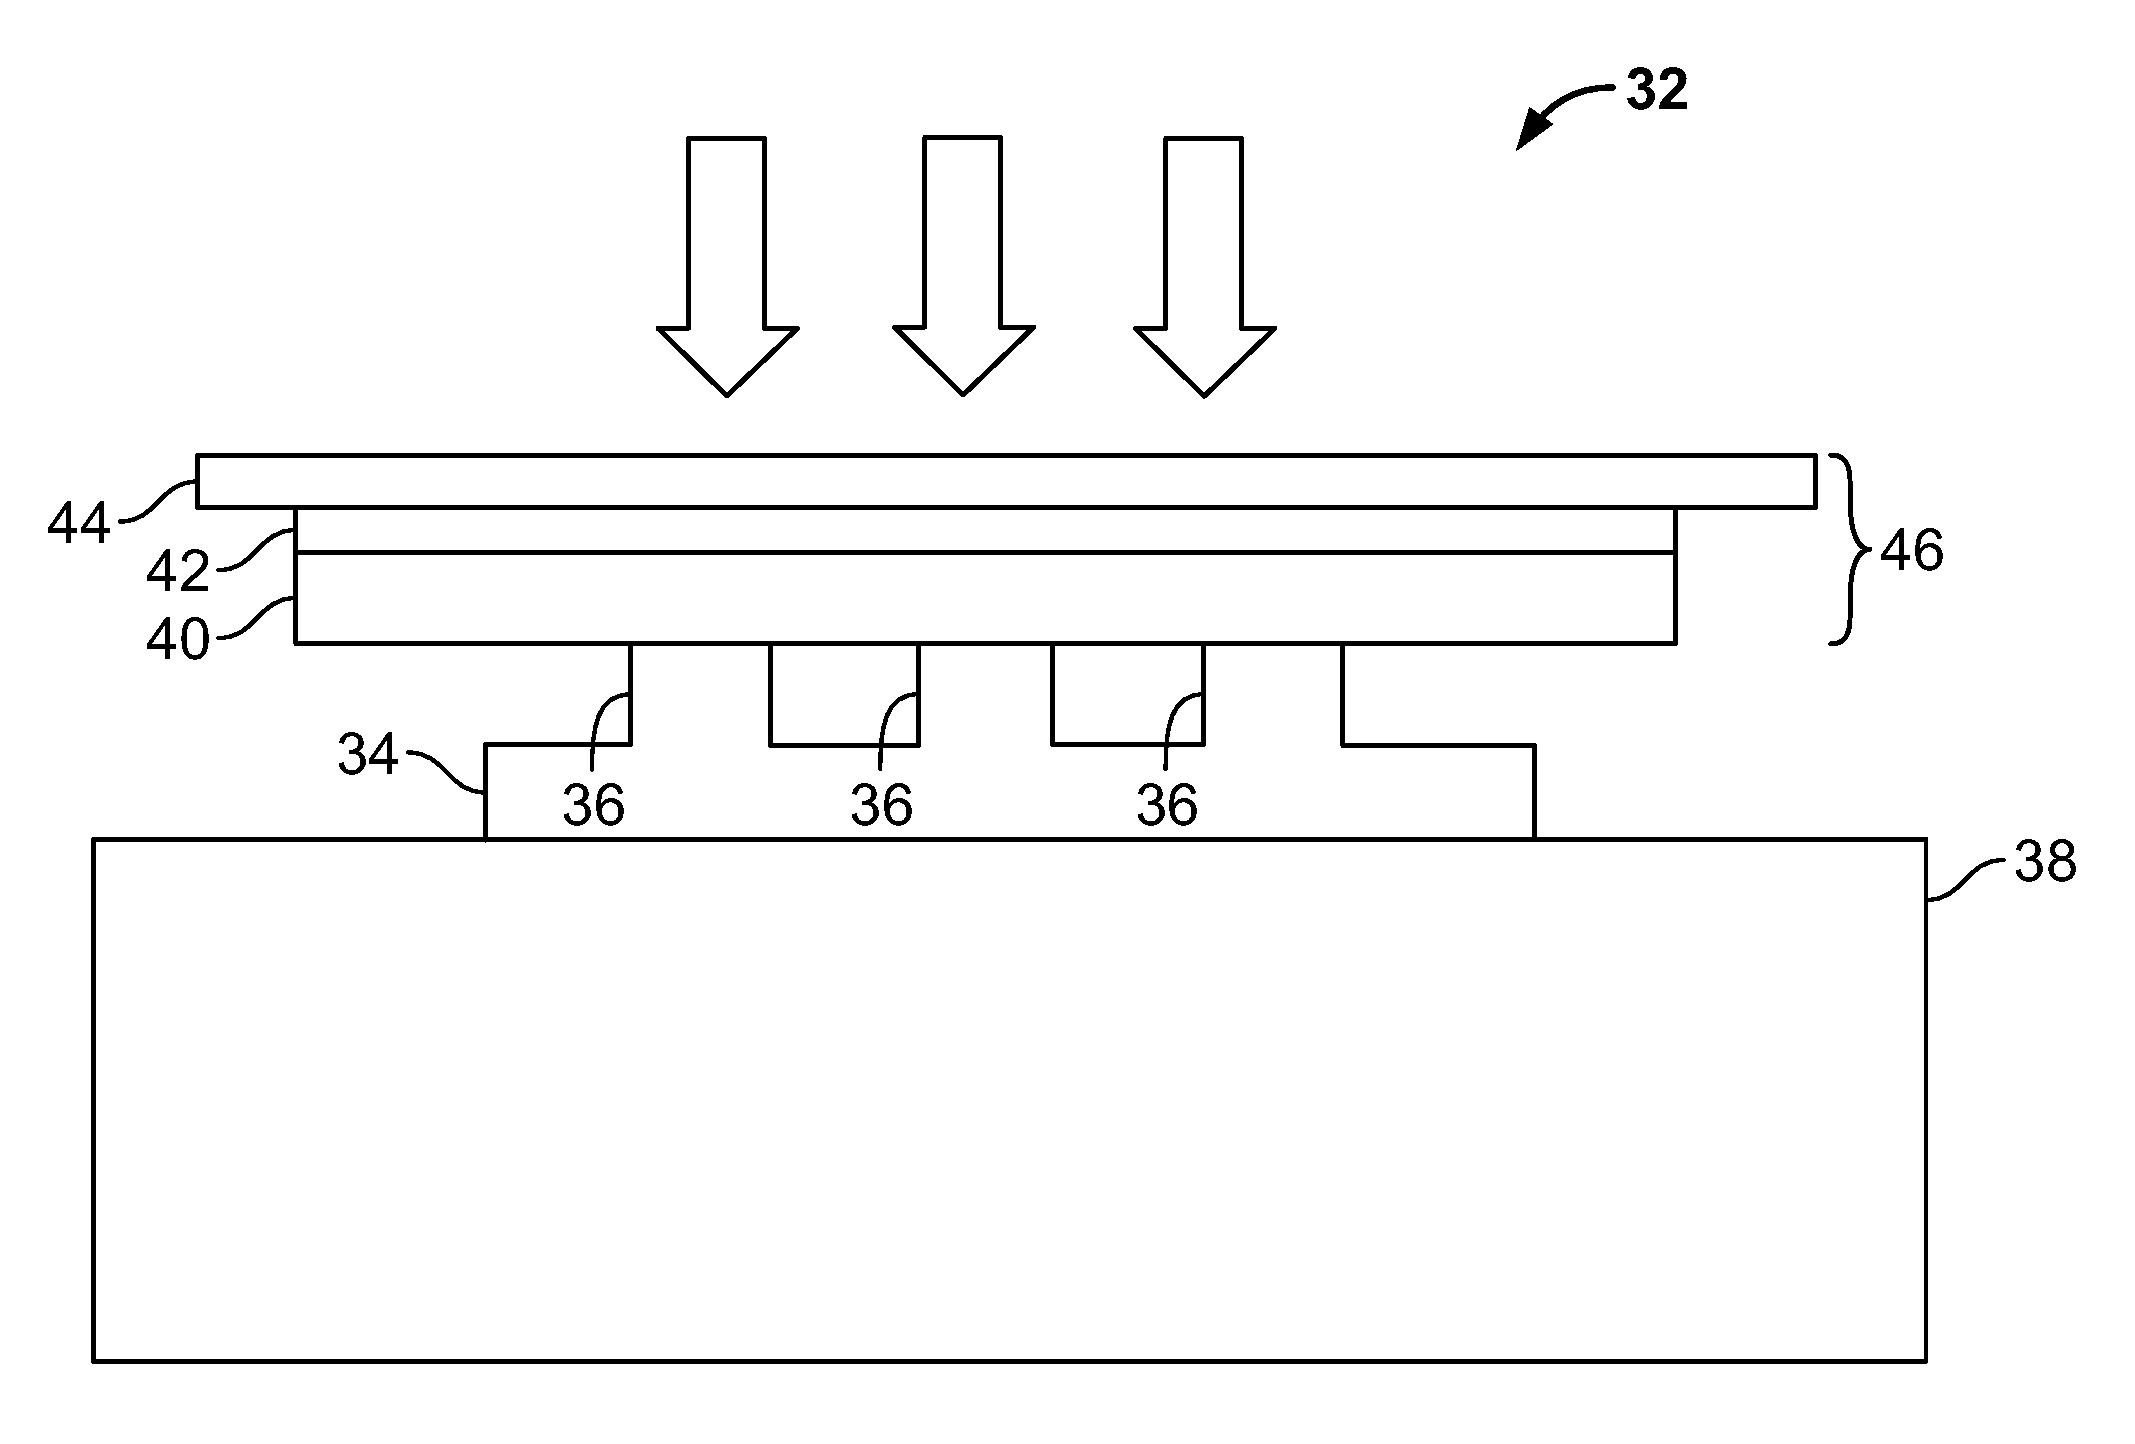 High-throughput graphene printing and selective transfer using a localized laser heating technique